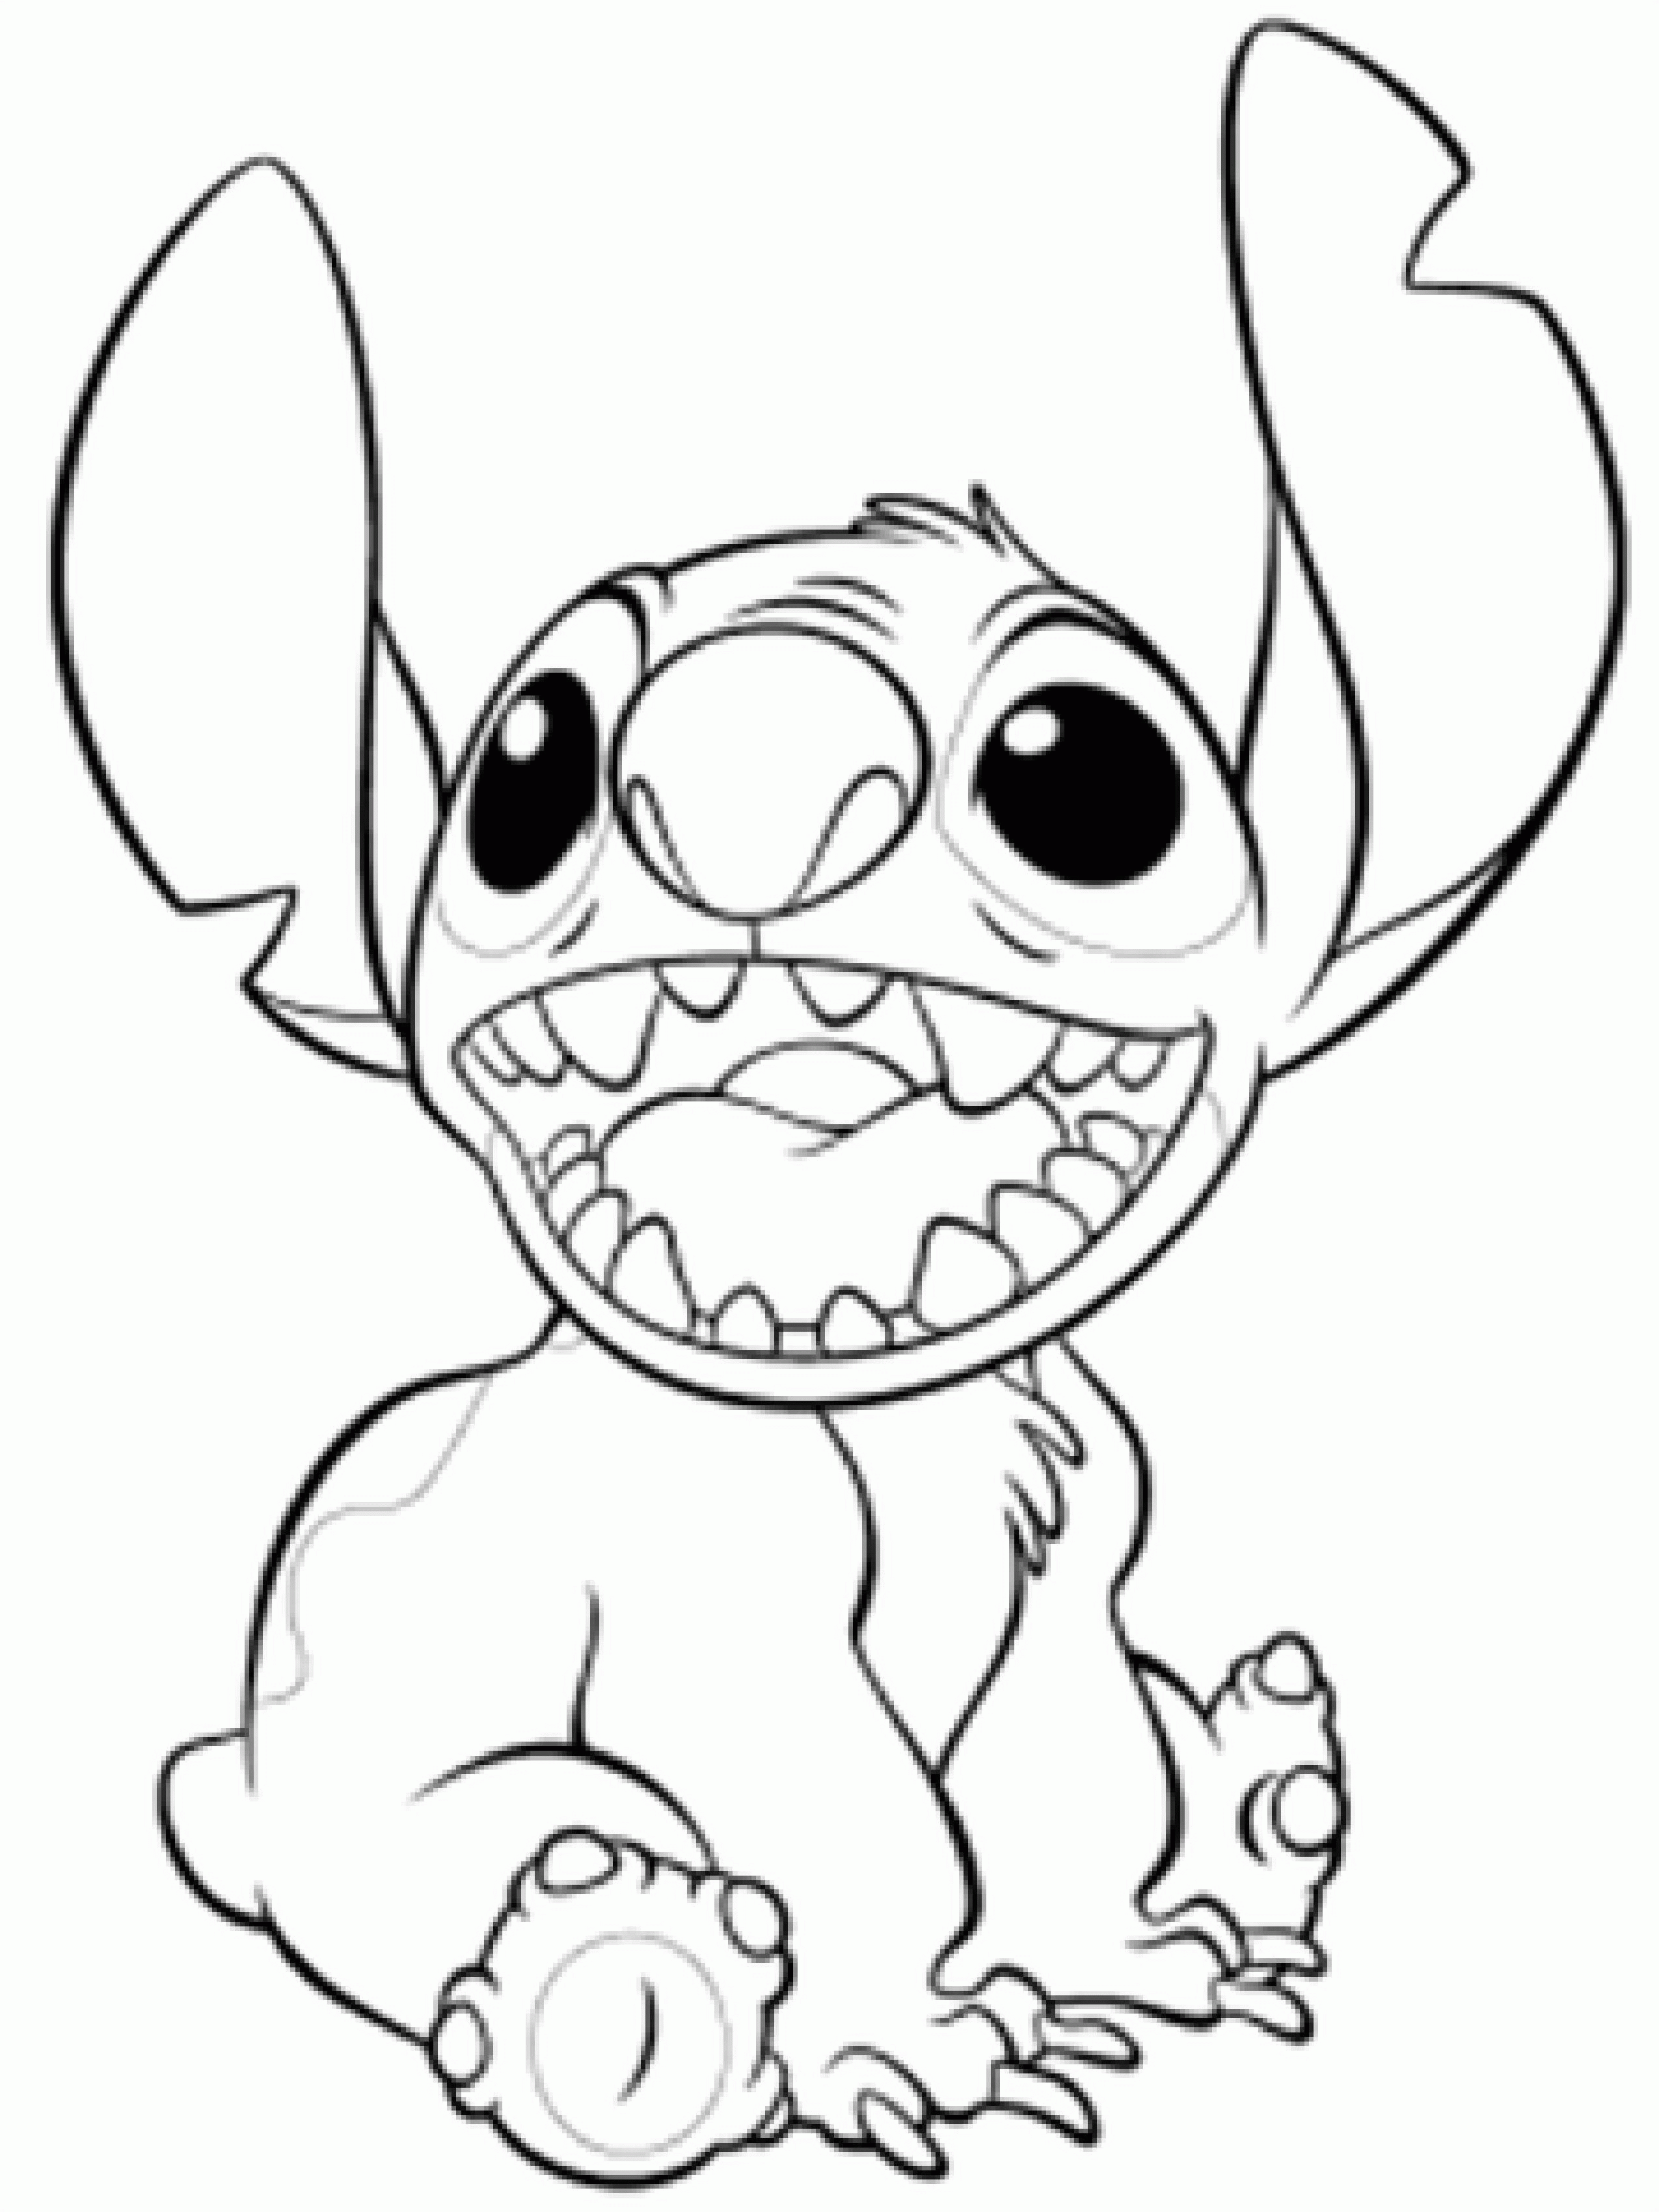 Cute Cool Coloring Pages To Print for Kids